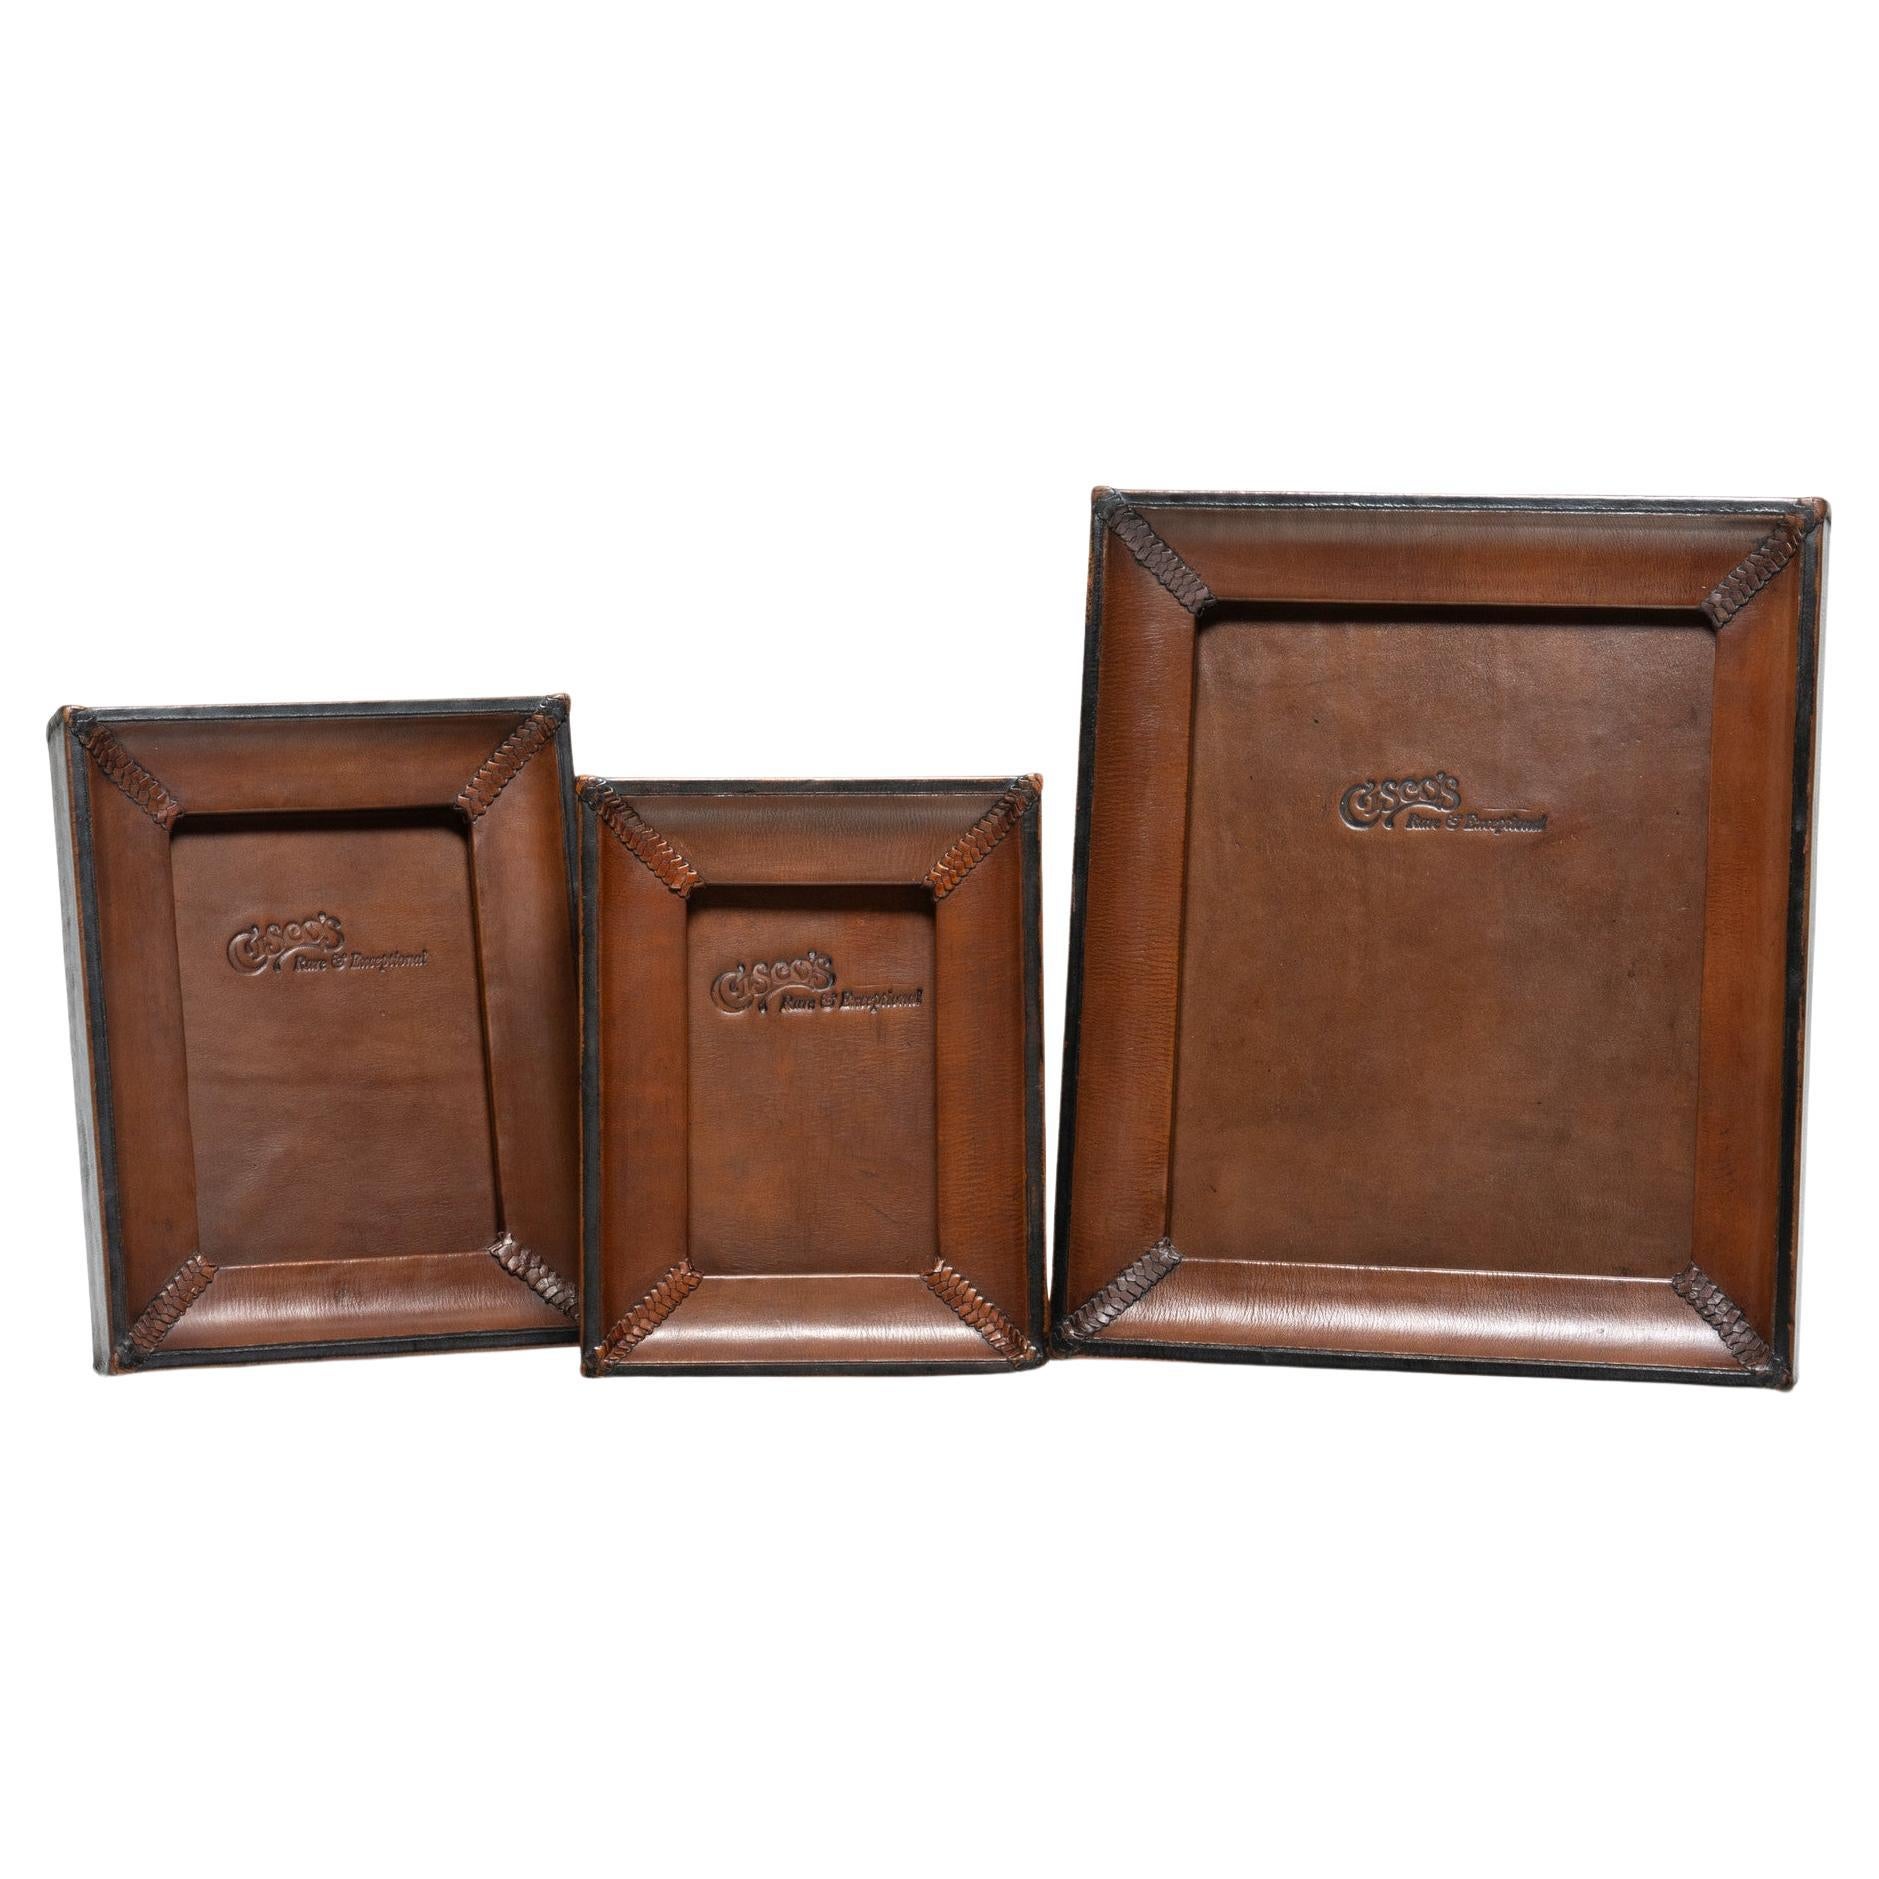 5x7 Medium Brown and Black Leather Tabletop Picture Frame - The Artisan For Sale